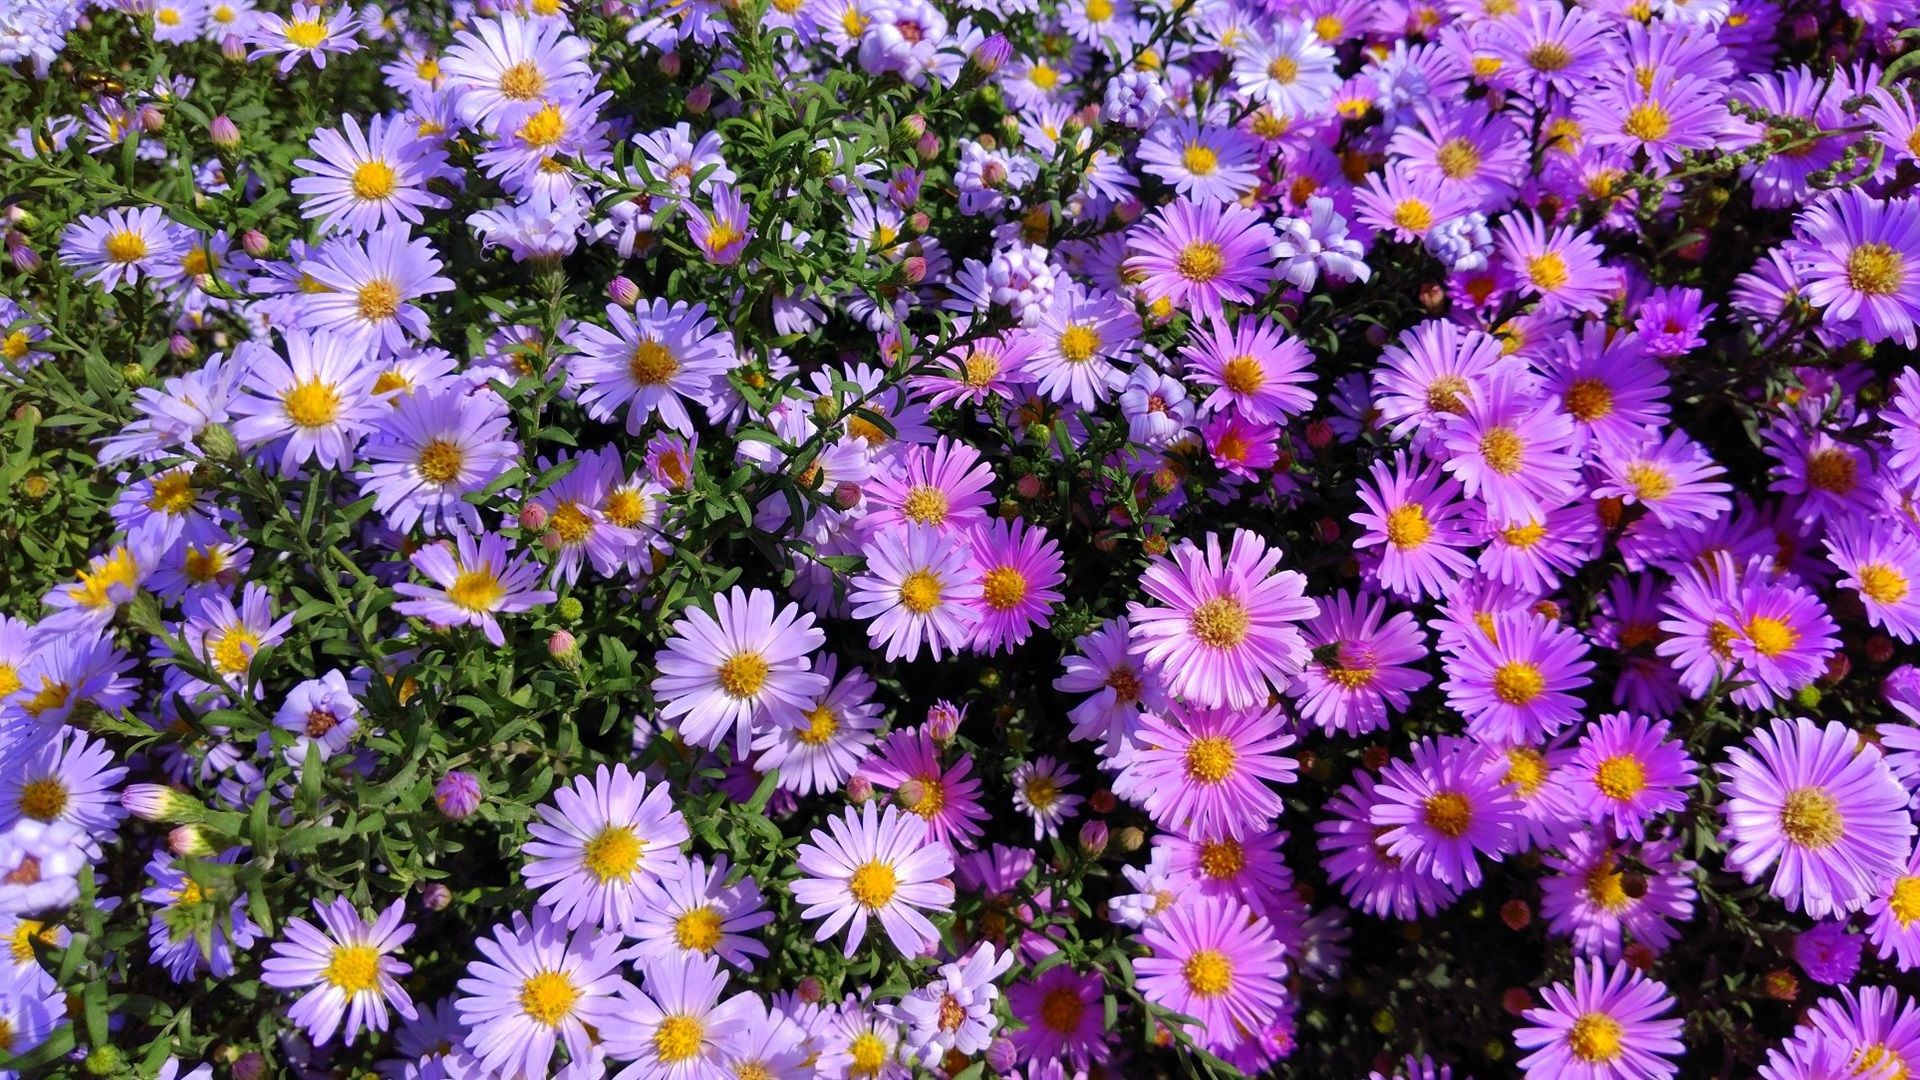 Wallpaper Pink aster flowers 1920x1080 Full HD 2K Picture, Image